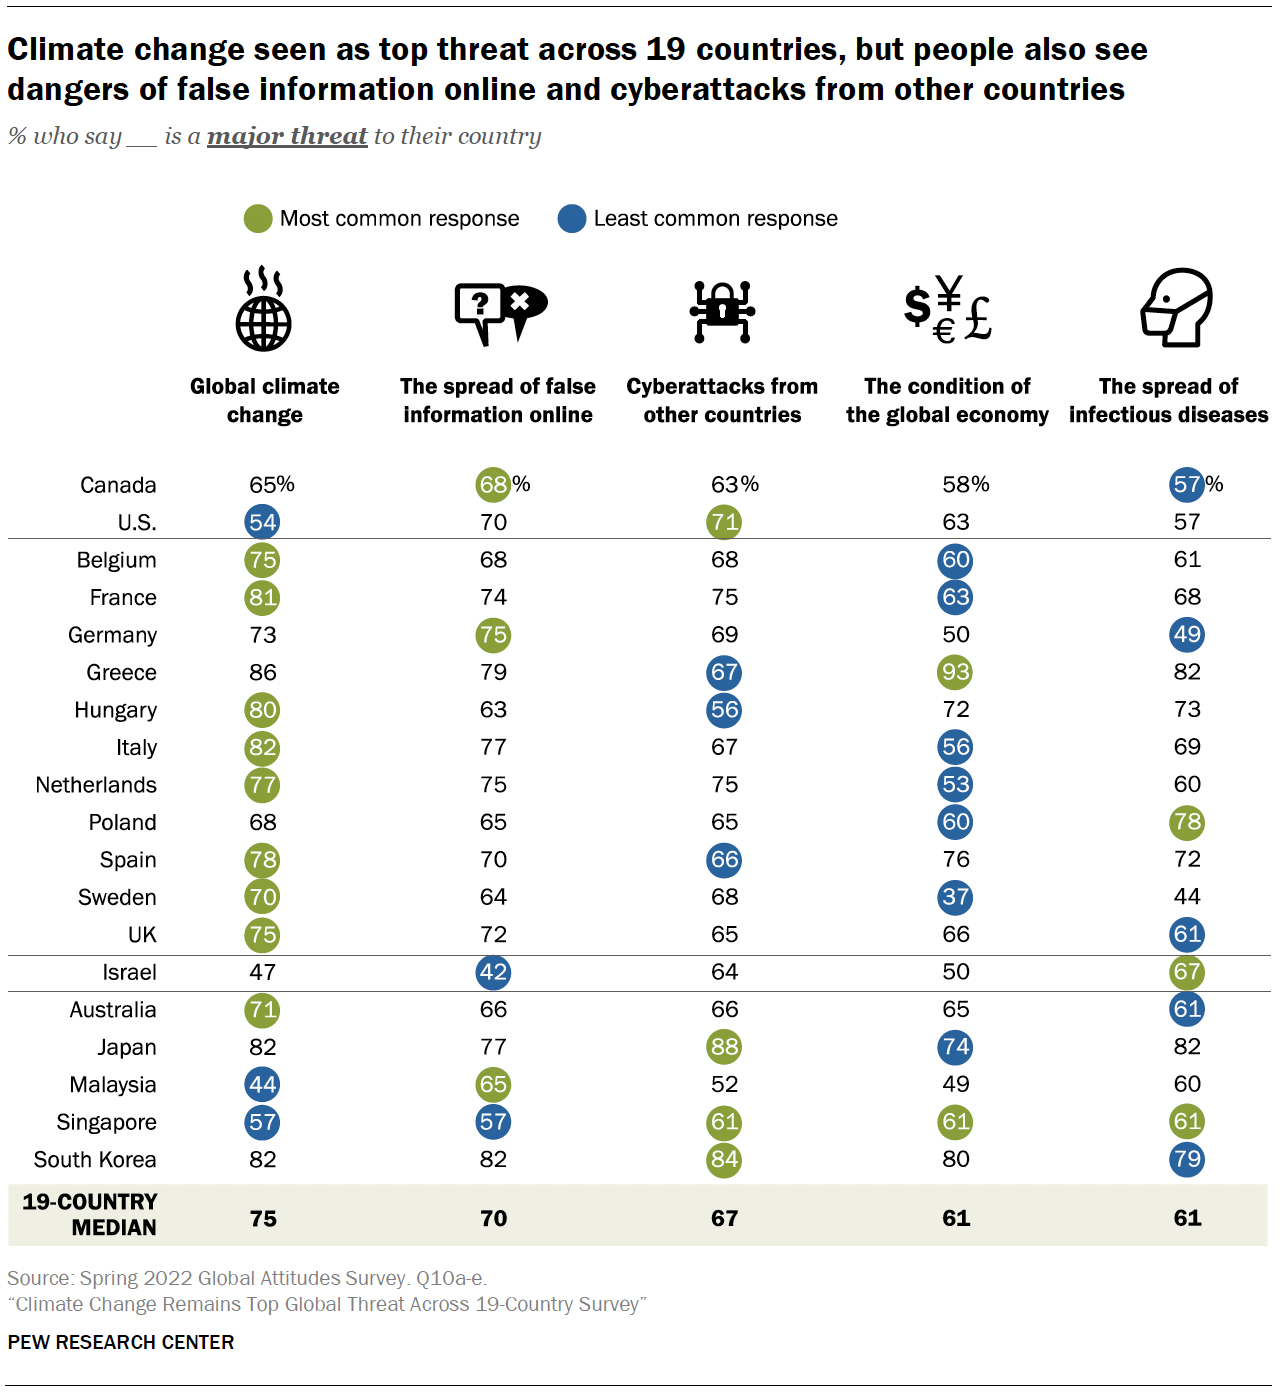 Climate change seen as top threat across 19 countries, but people also see dangers of false information online and cyberattacks from other countries